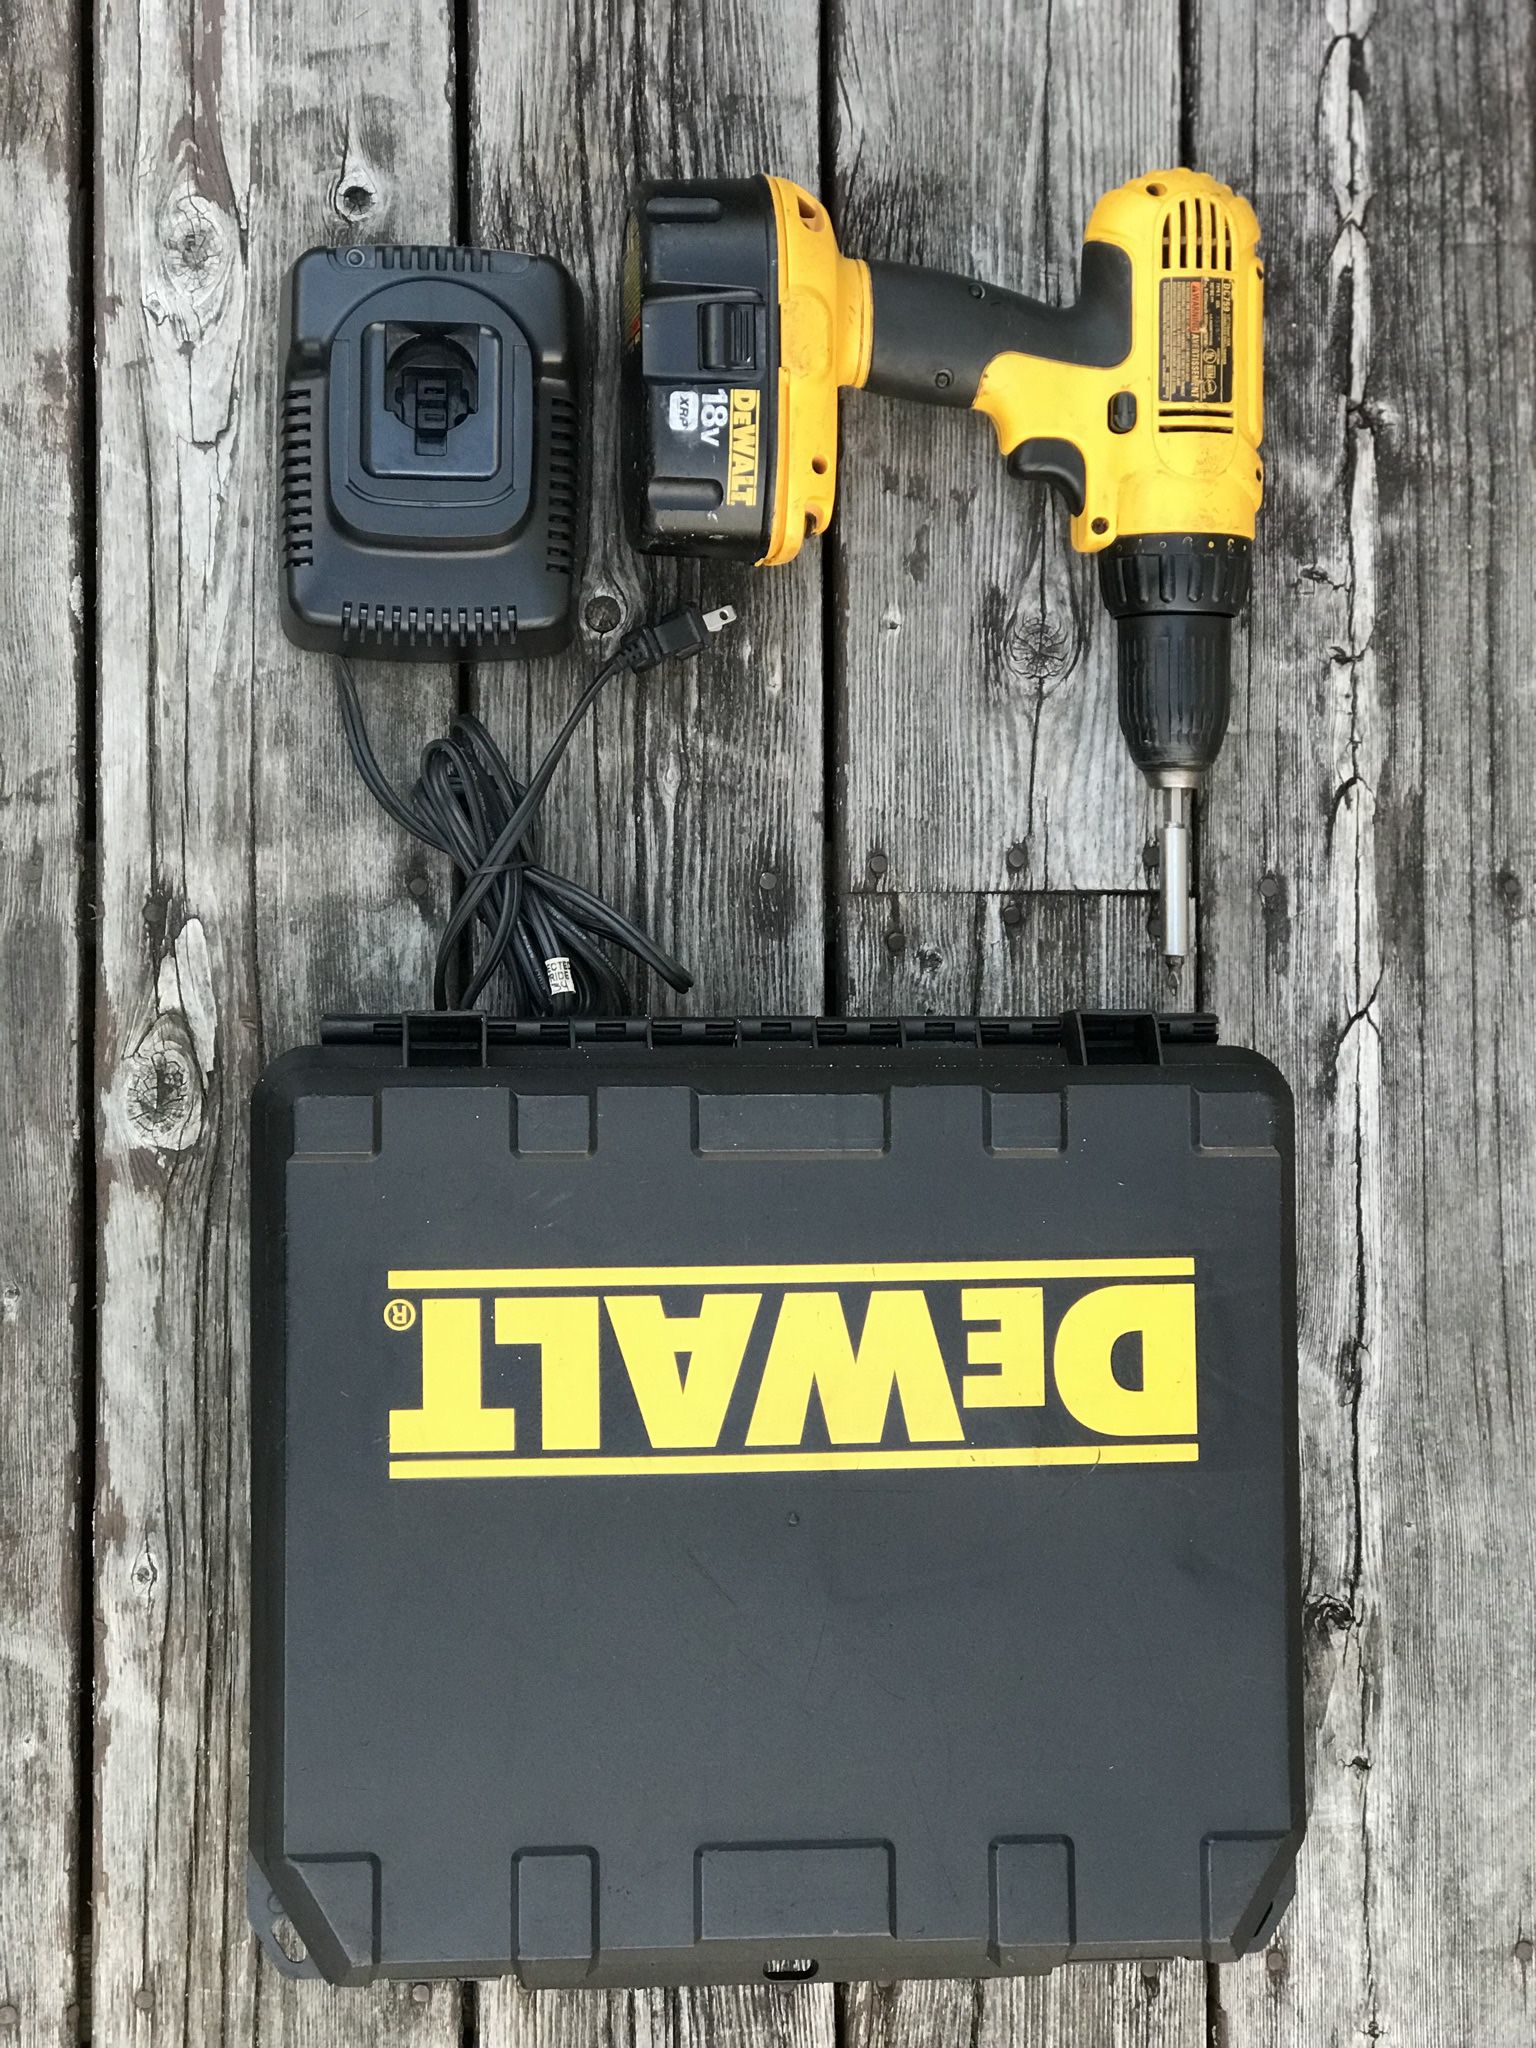 Dewalt DC759 18-Volt 1/2-Inch Cordless Drill/Driver with battery, charger and case. good condition!